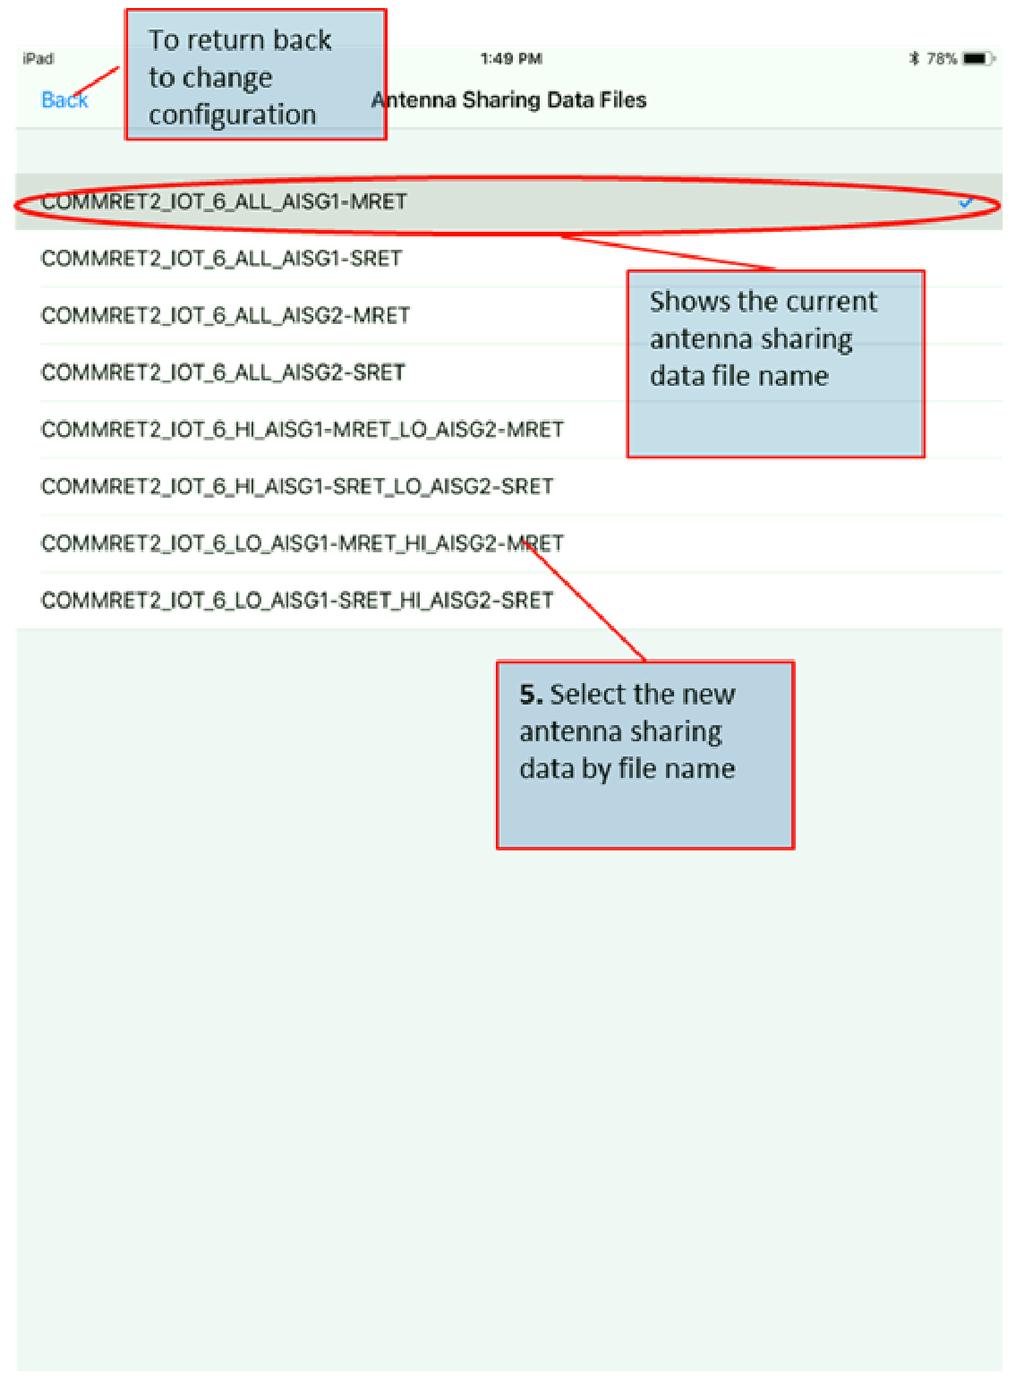 5. The Antenna Share Data Files screen is shown with a list of file names. The current antenna sharing configuration s file name is shown selected as shown in the figure 3-4.